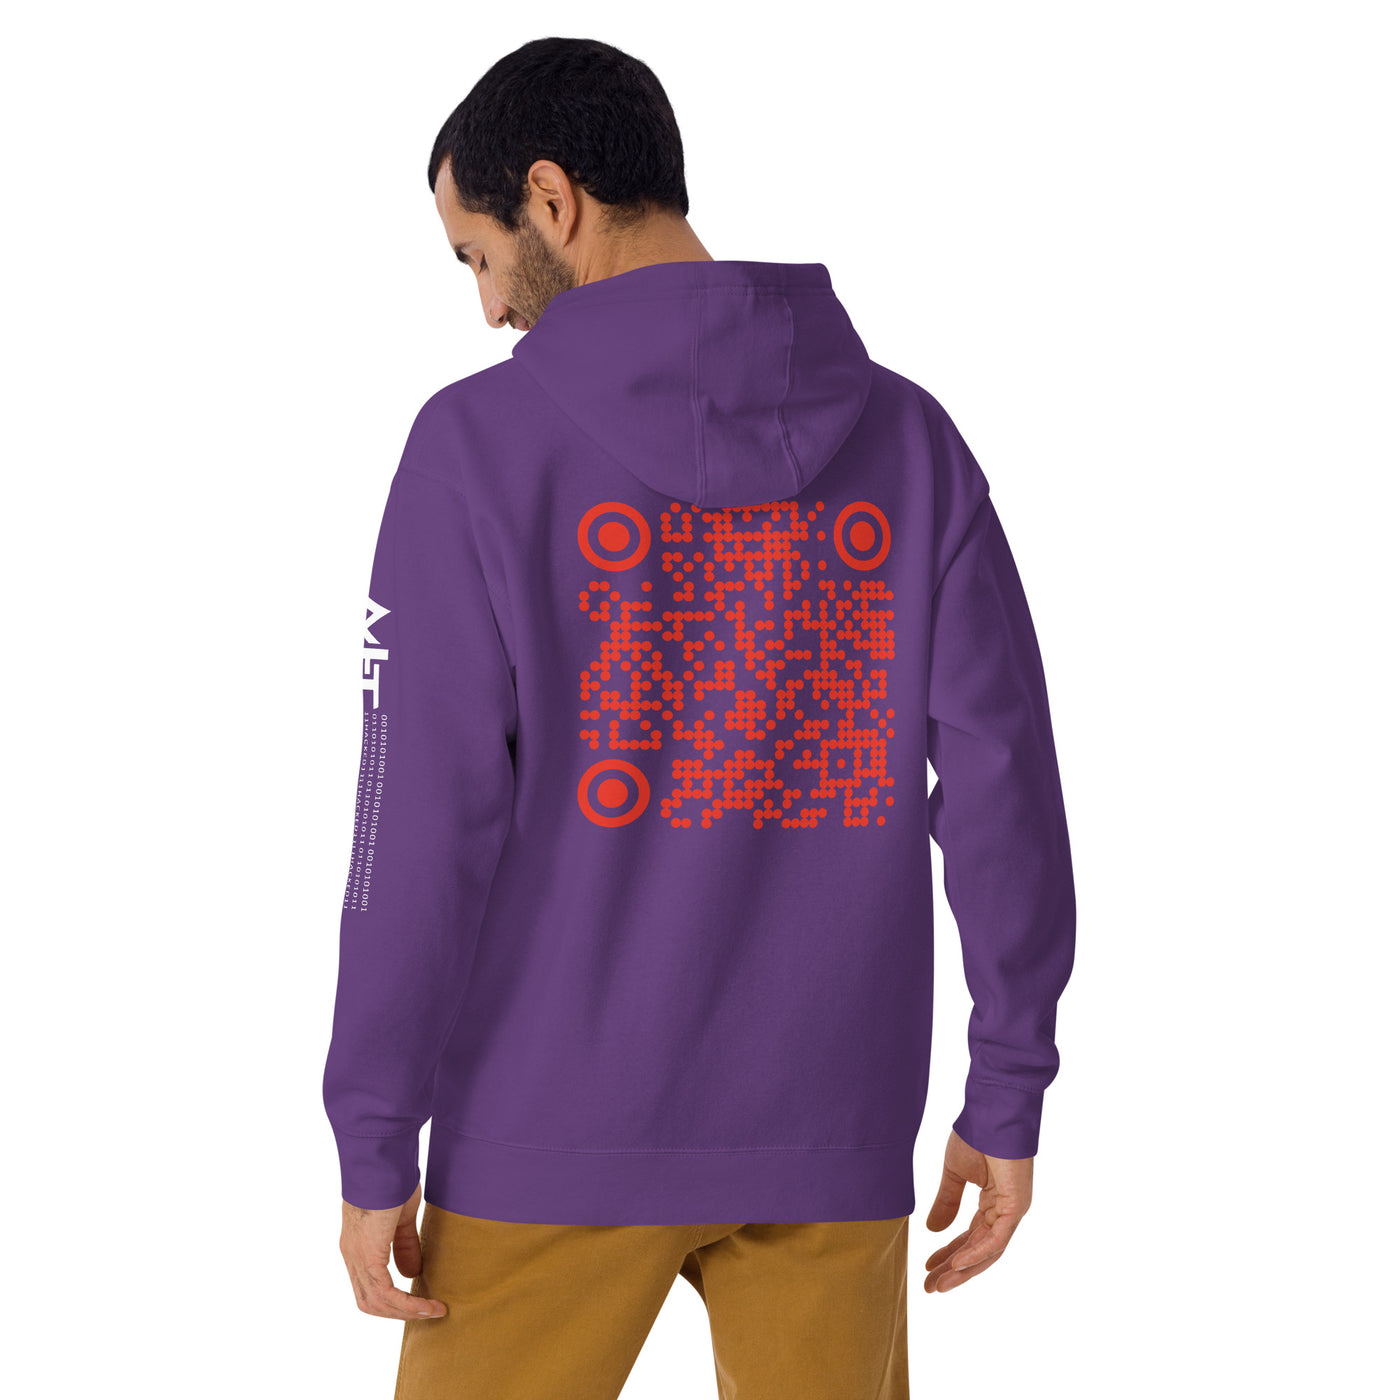 Who's the New Kid, Hacker, Developer, Gamer, Crypto King V1 (Red Cyber) - Unisex Hoodie Personalized QR Code